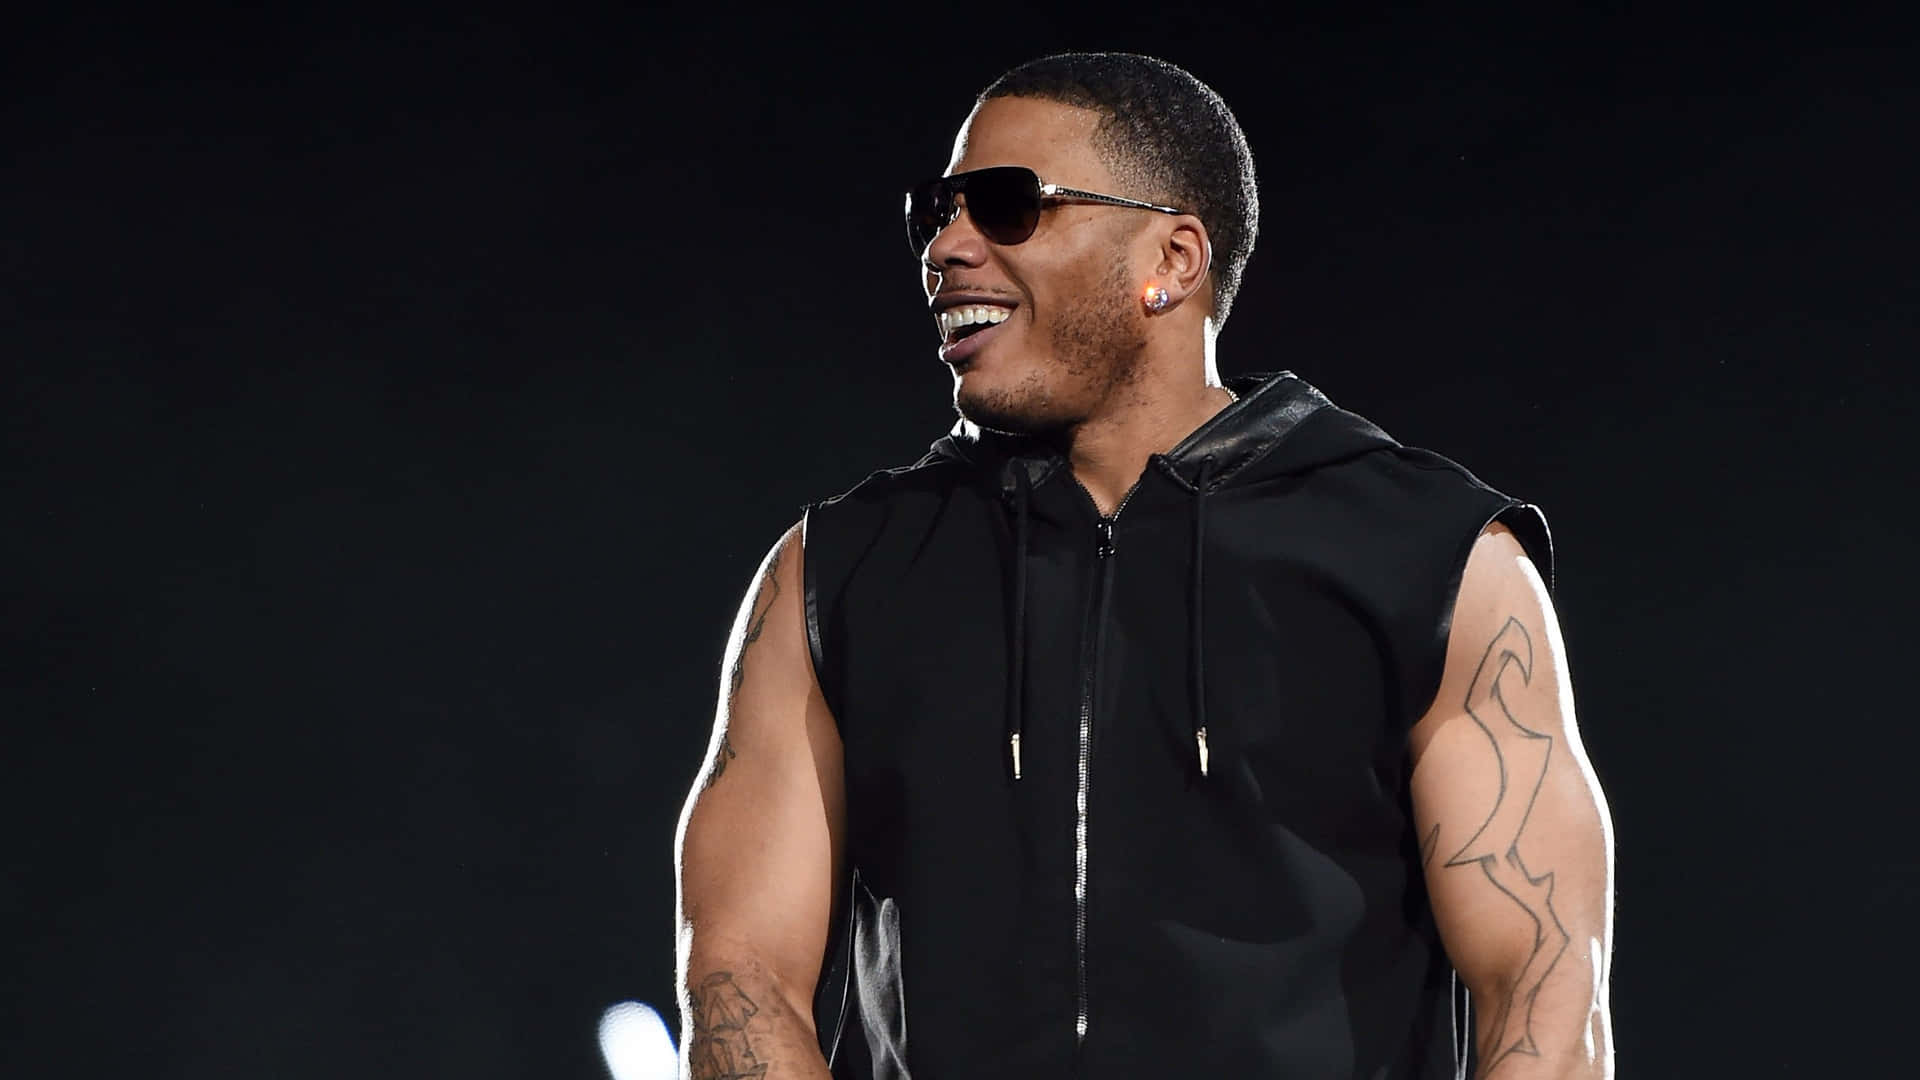 Nelly During Concert At Sangamon County Fair 2021 Wallpaper